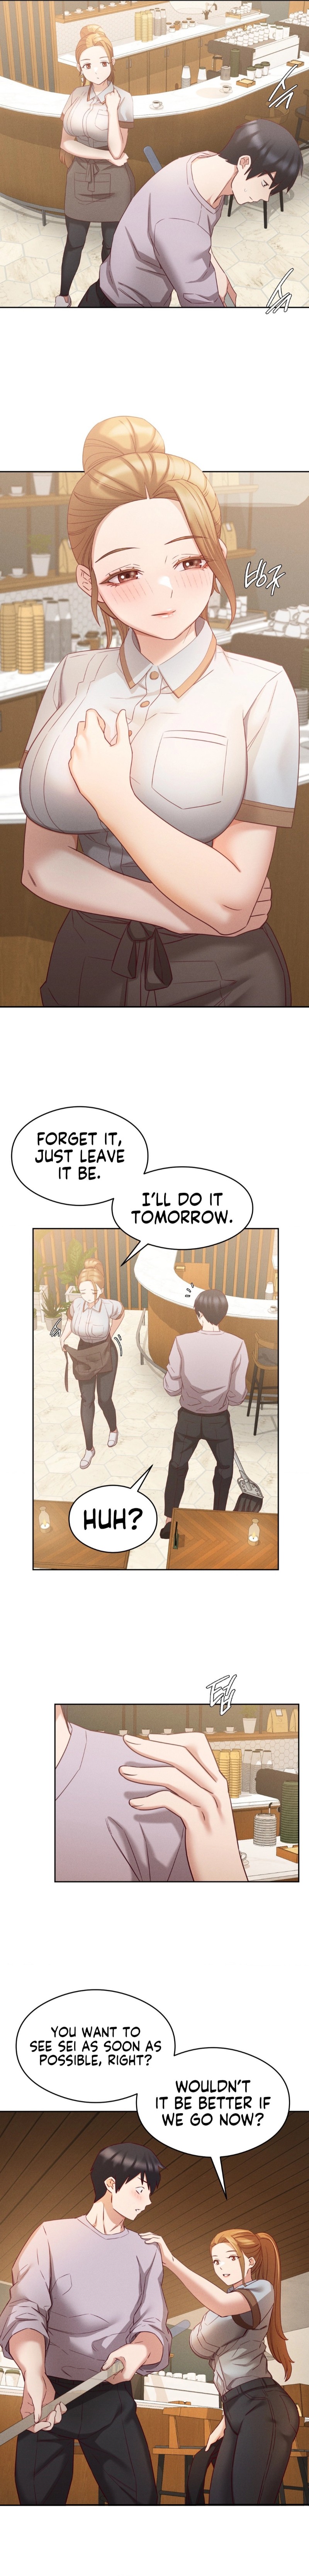 Shall We Go To The Ryokan Together? - Chapter 8 Page 11